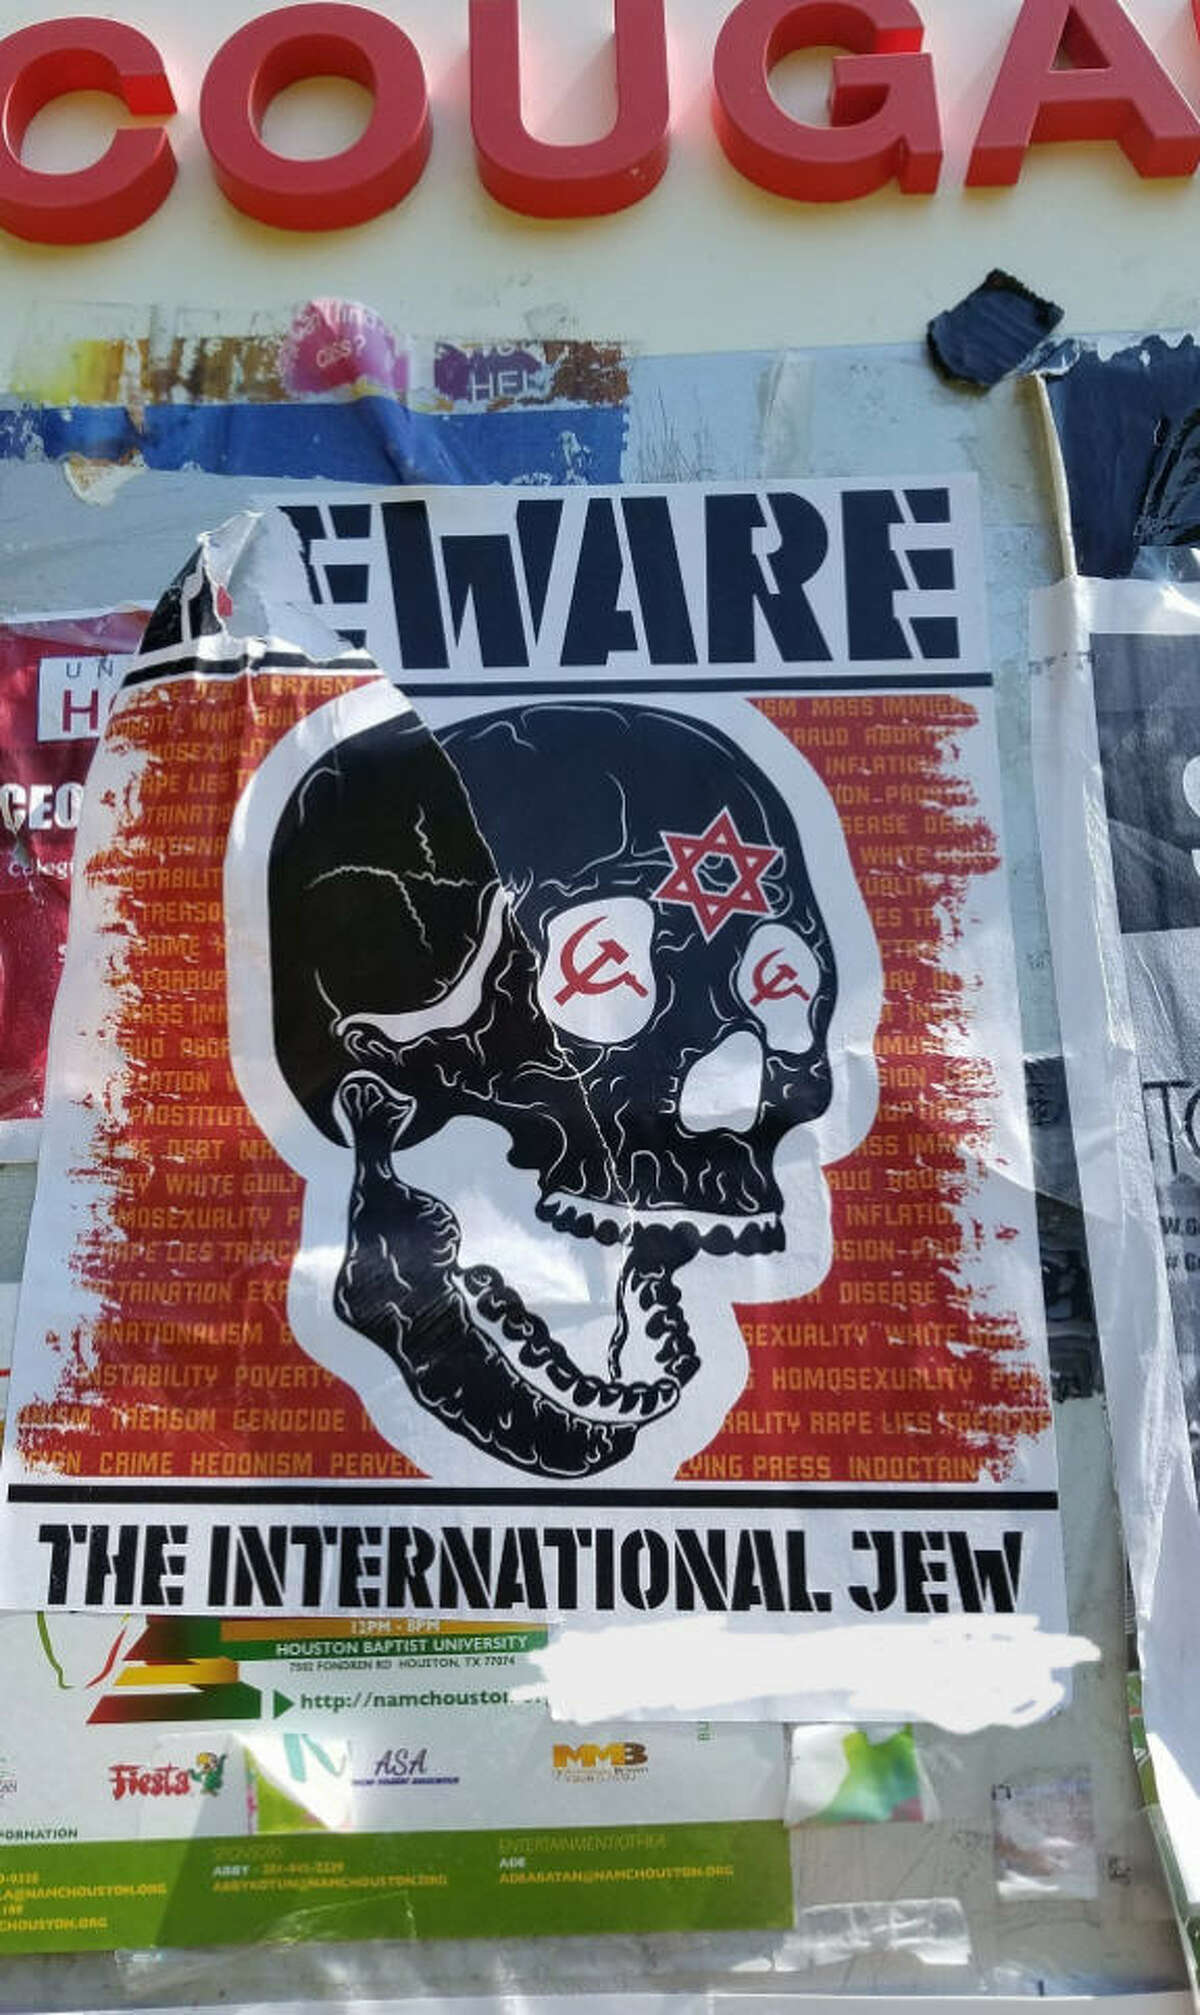 Michael Leone spotted white supremacist posters on the University of Houston campus on Sept. 12, 2017. See more of the posters and scenes from the Unite the Right rally in Charlottesville up ahead. 